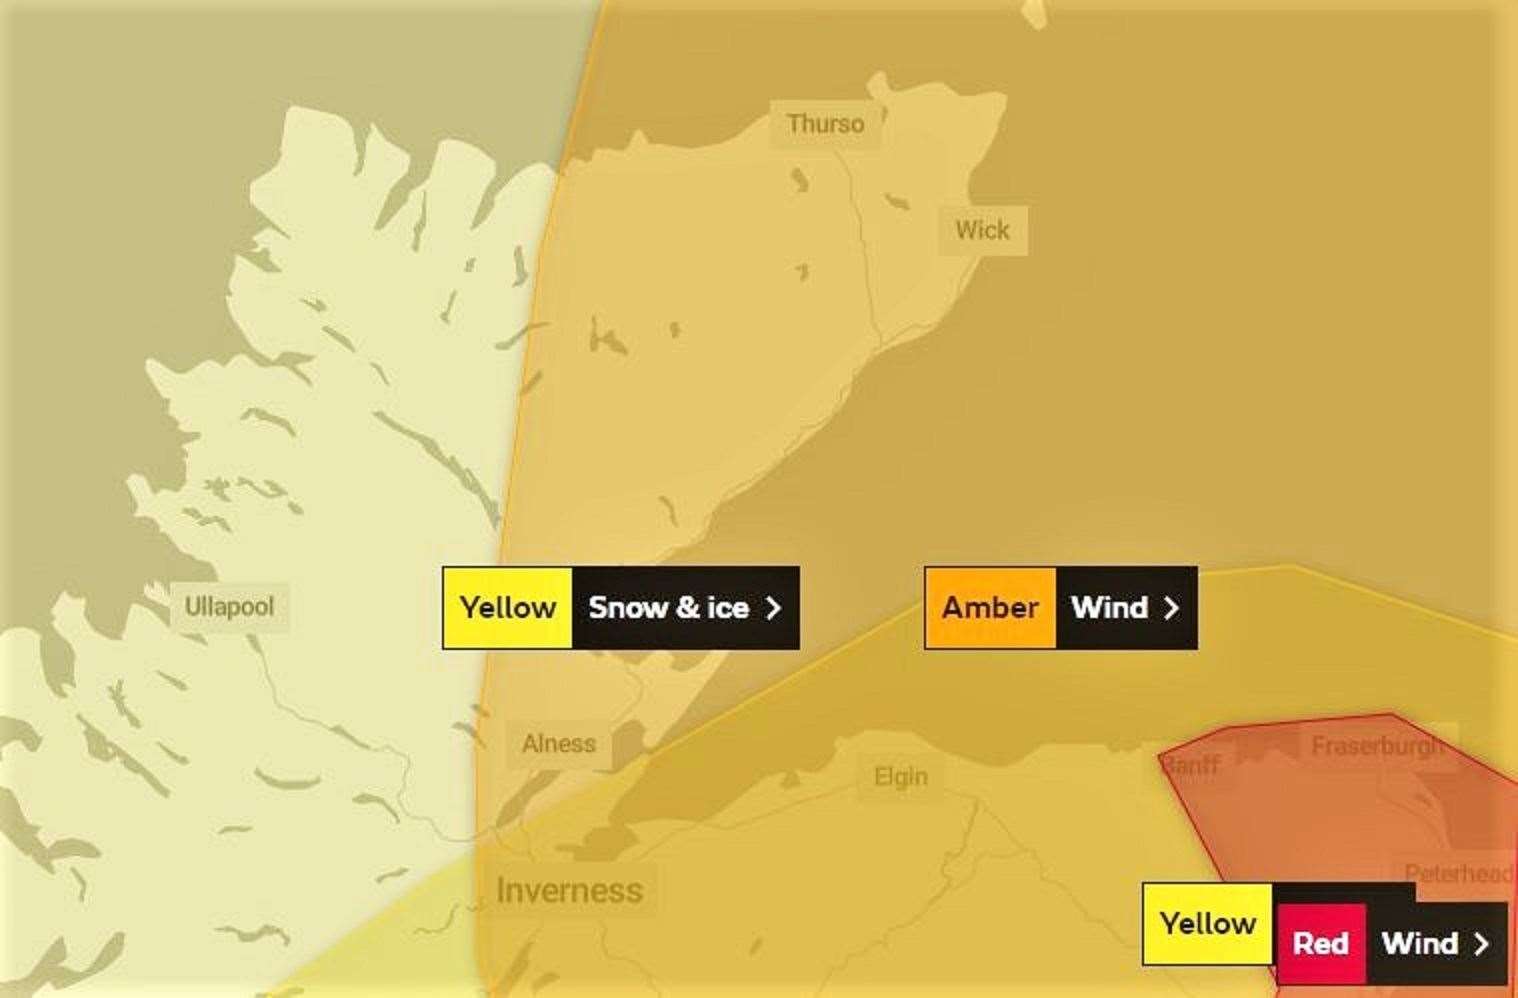 An amber warning was issued by the Met Office for northern and eastern Scotland.